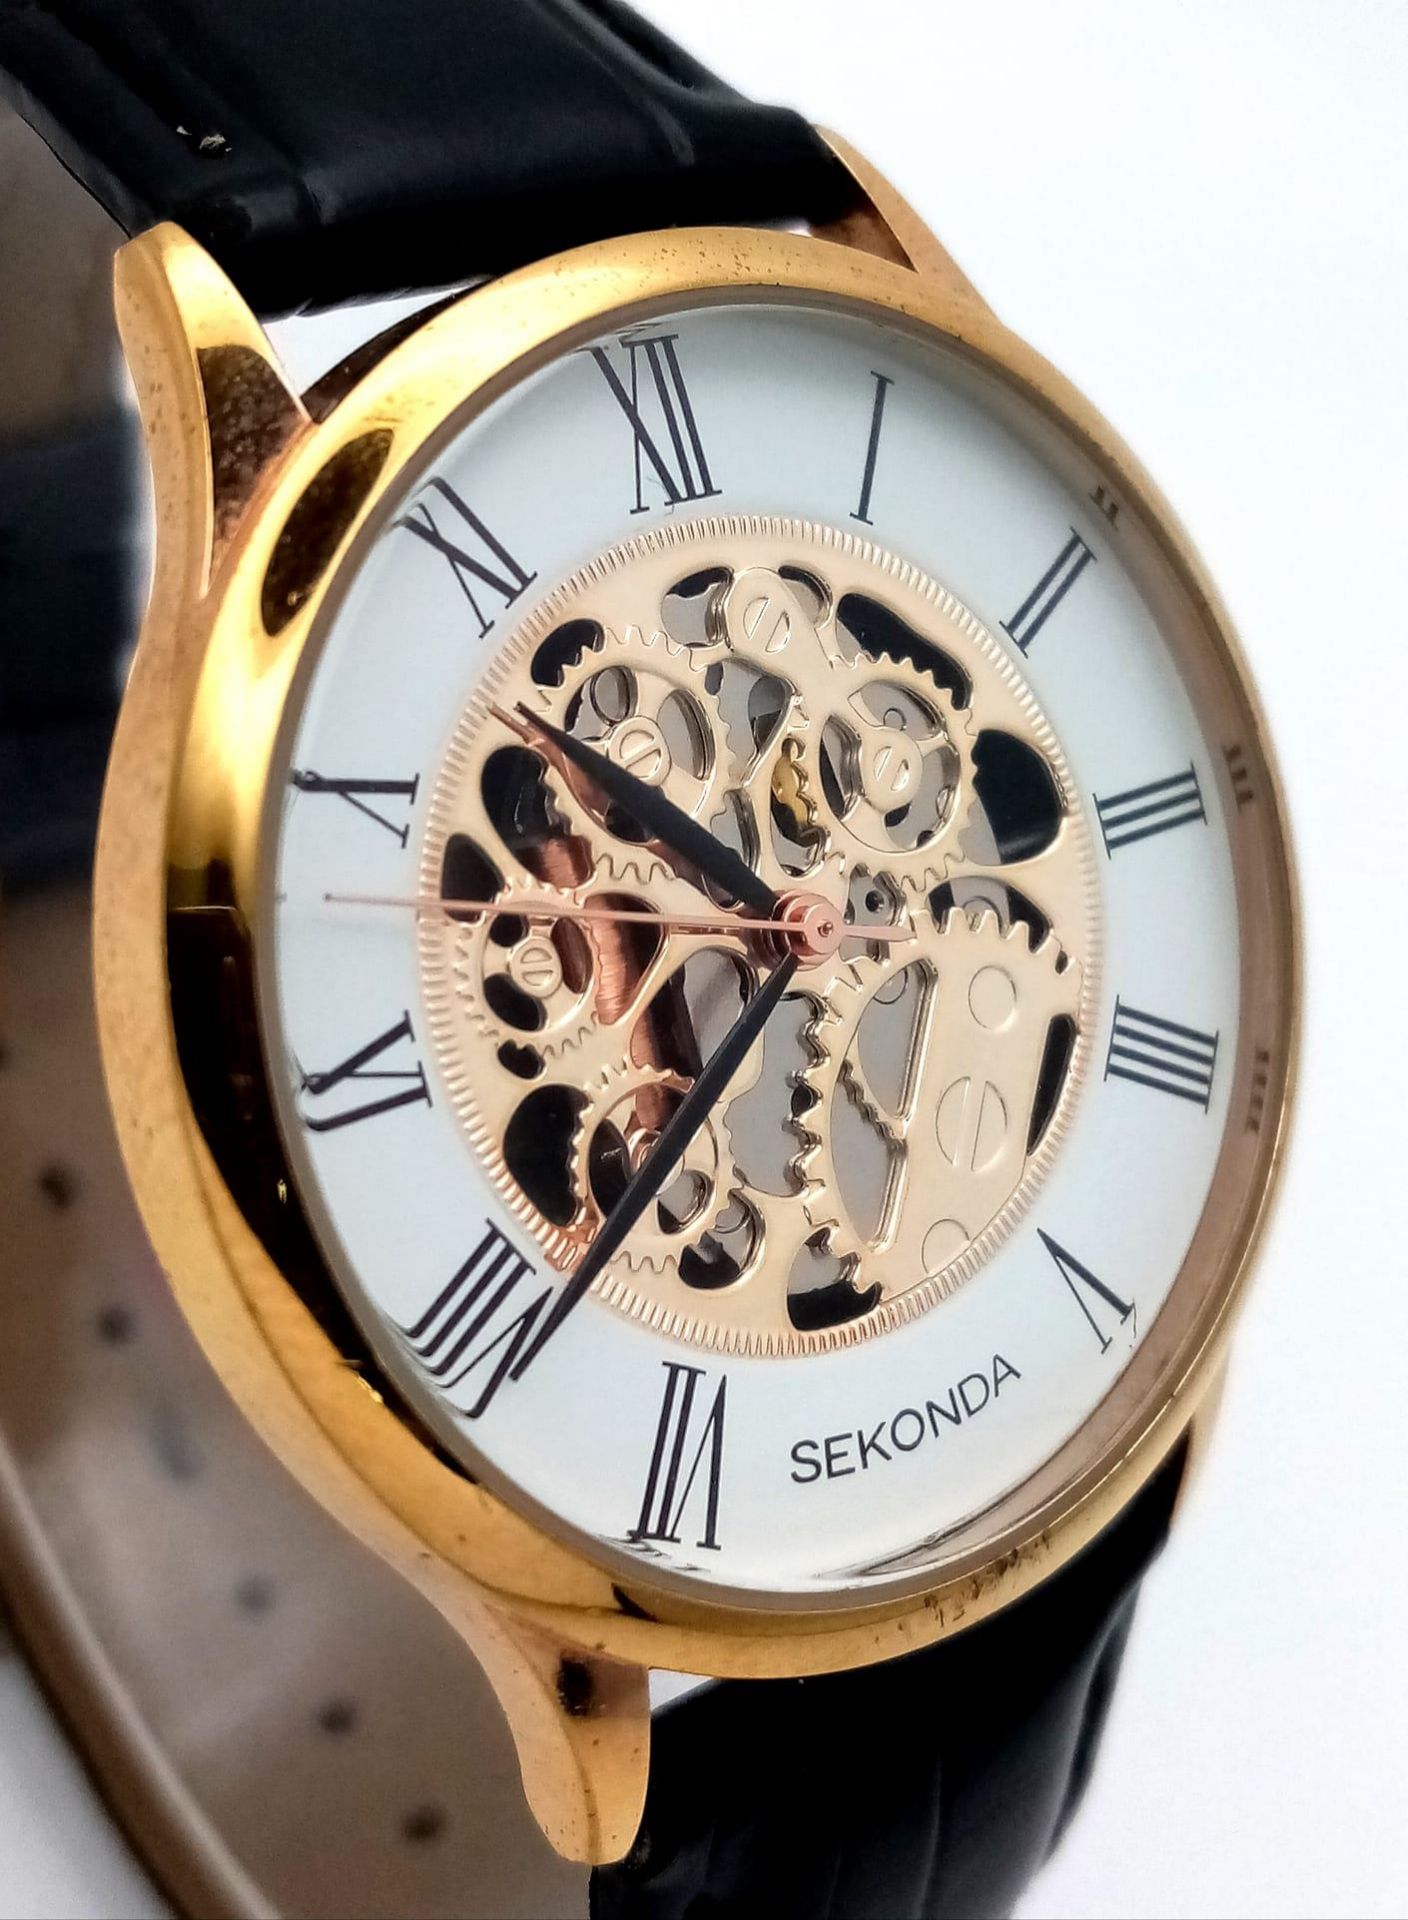 A Sekonda Automatic Skeleton Gents Watch. Black leather strap. Gilded case - 37mm. Skeleton dial. In - Image 6 of 9